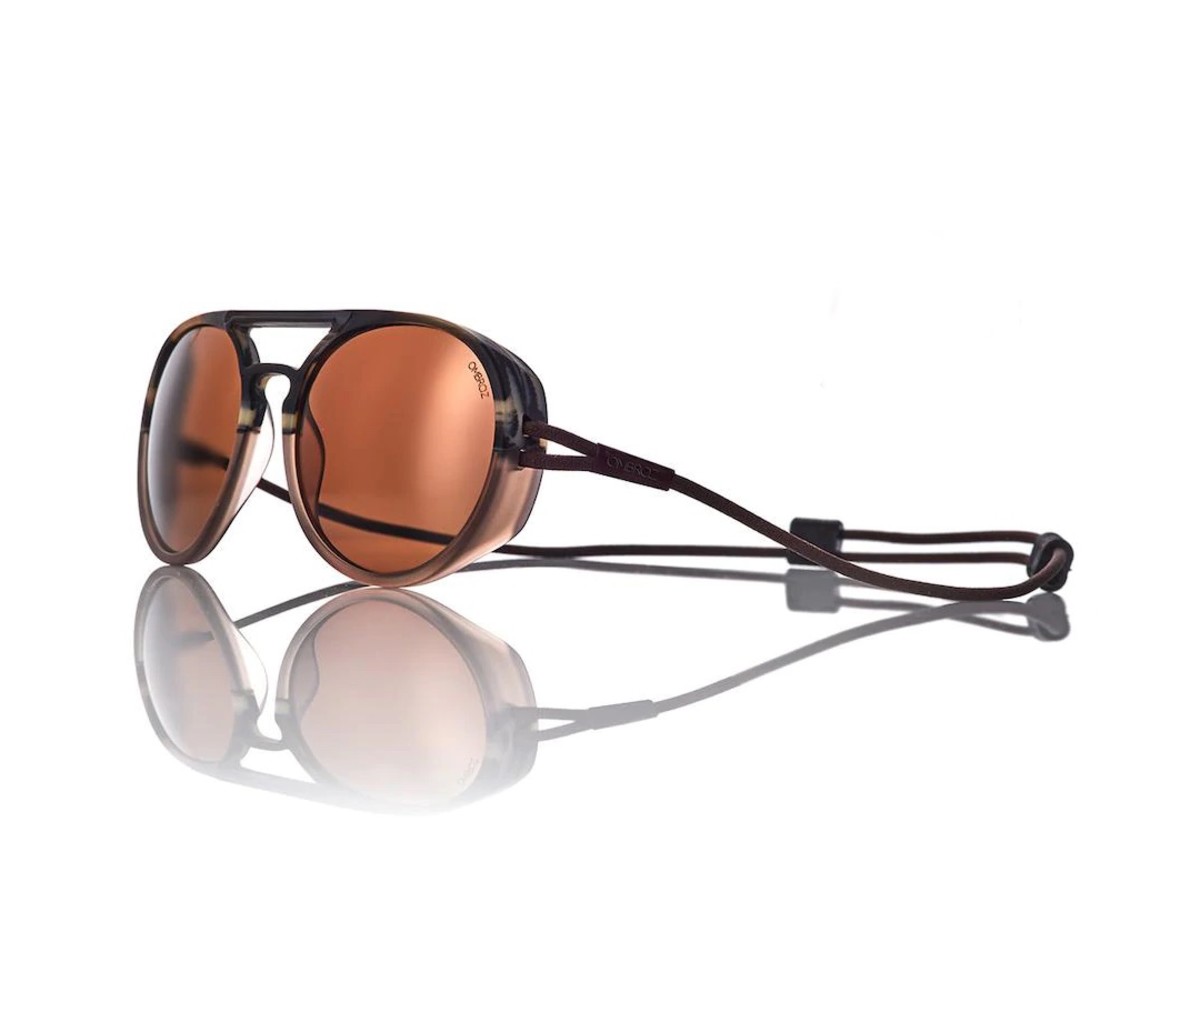 The unique Ombraz sunglasses avoid the temples for a snug elastic cord.